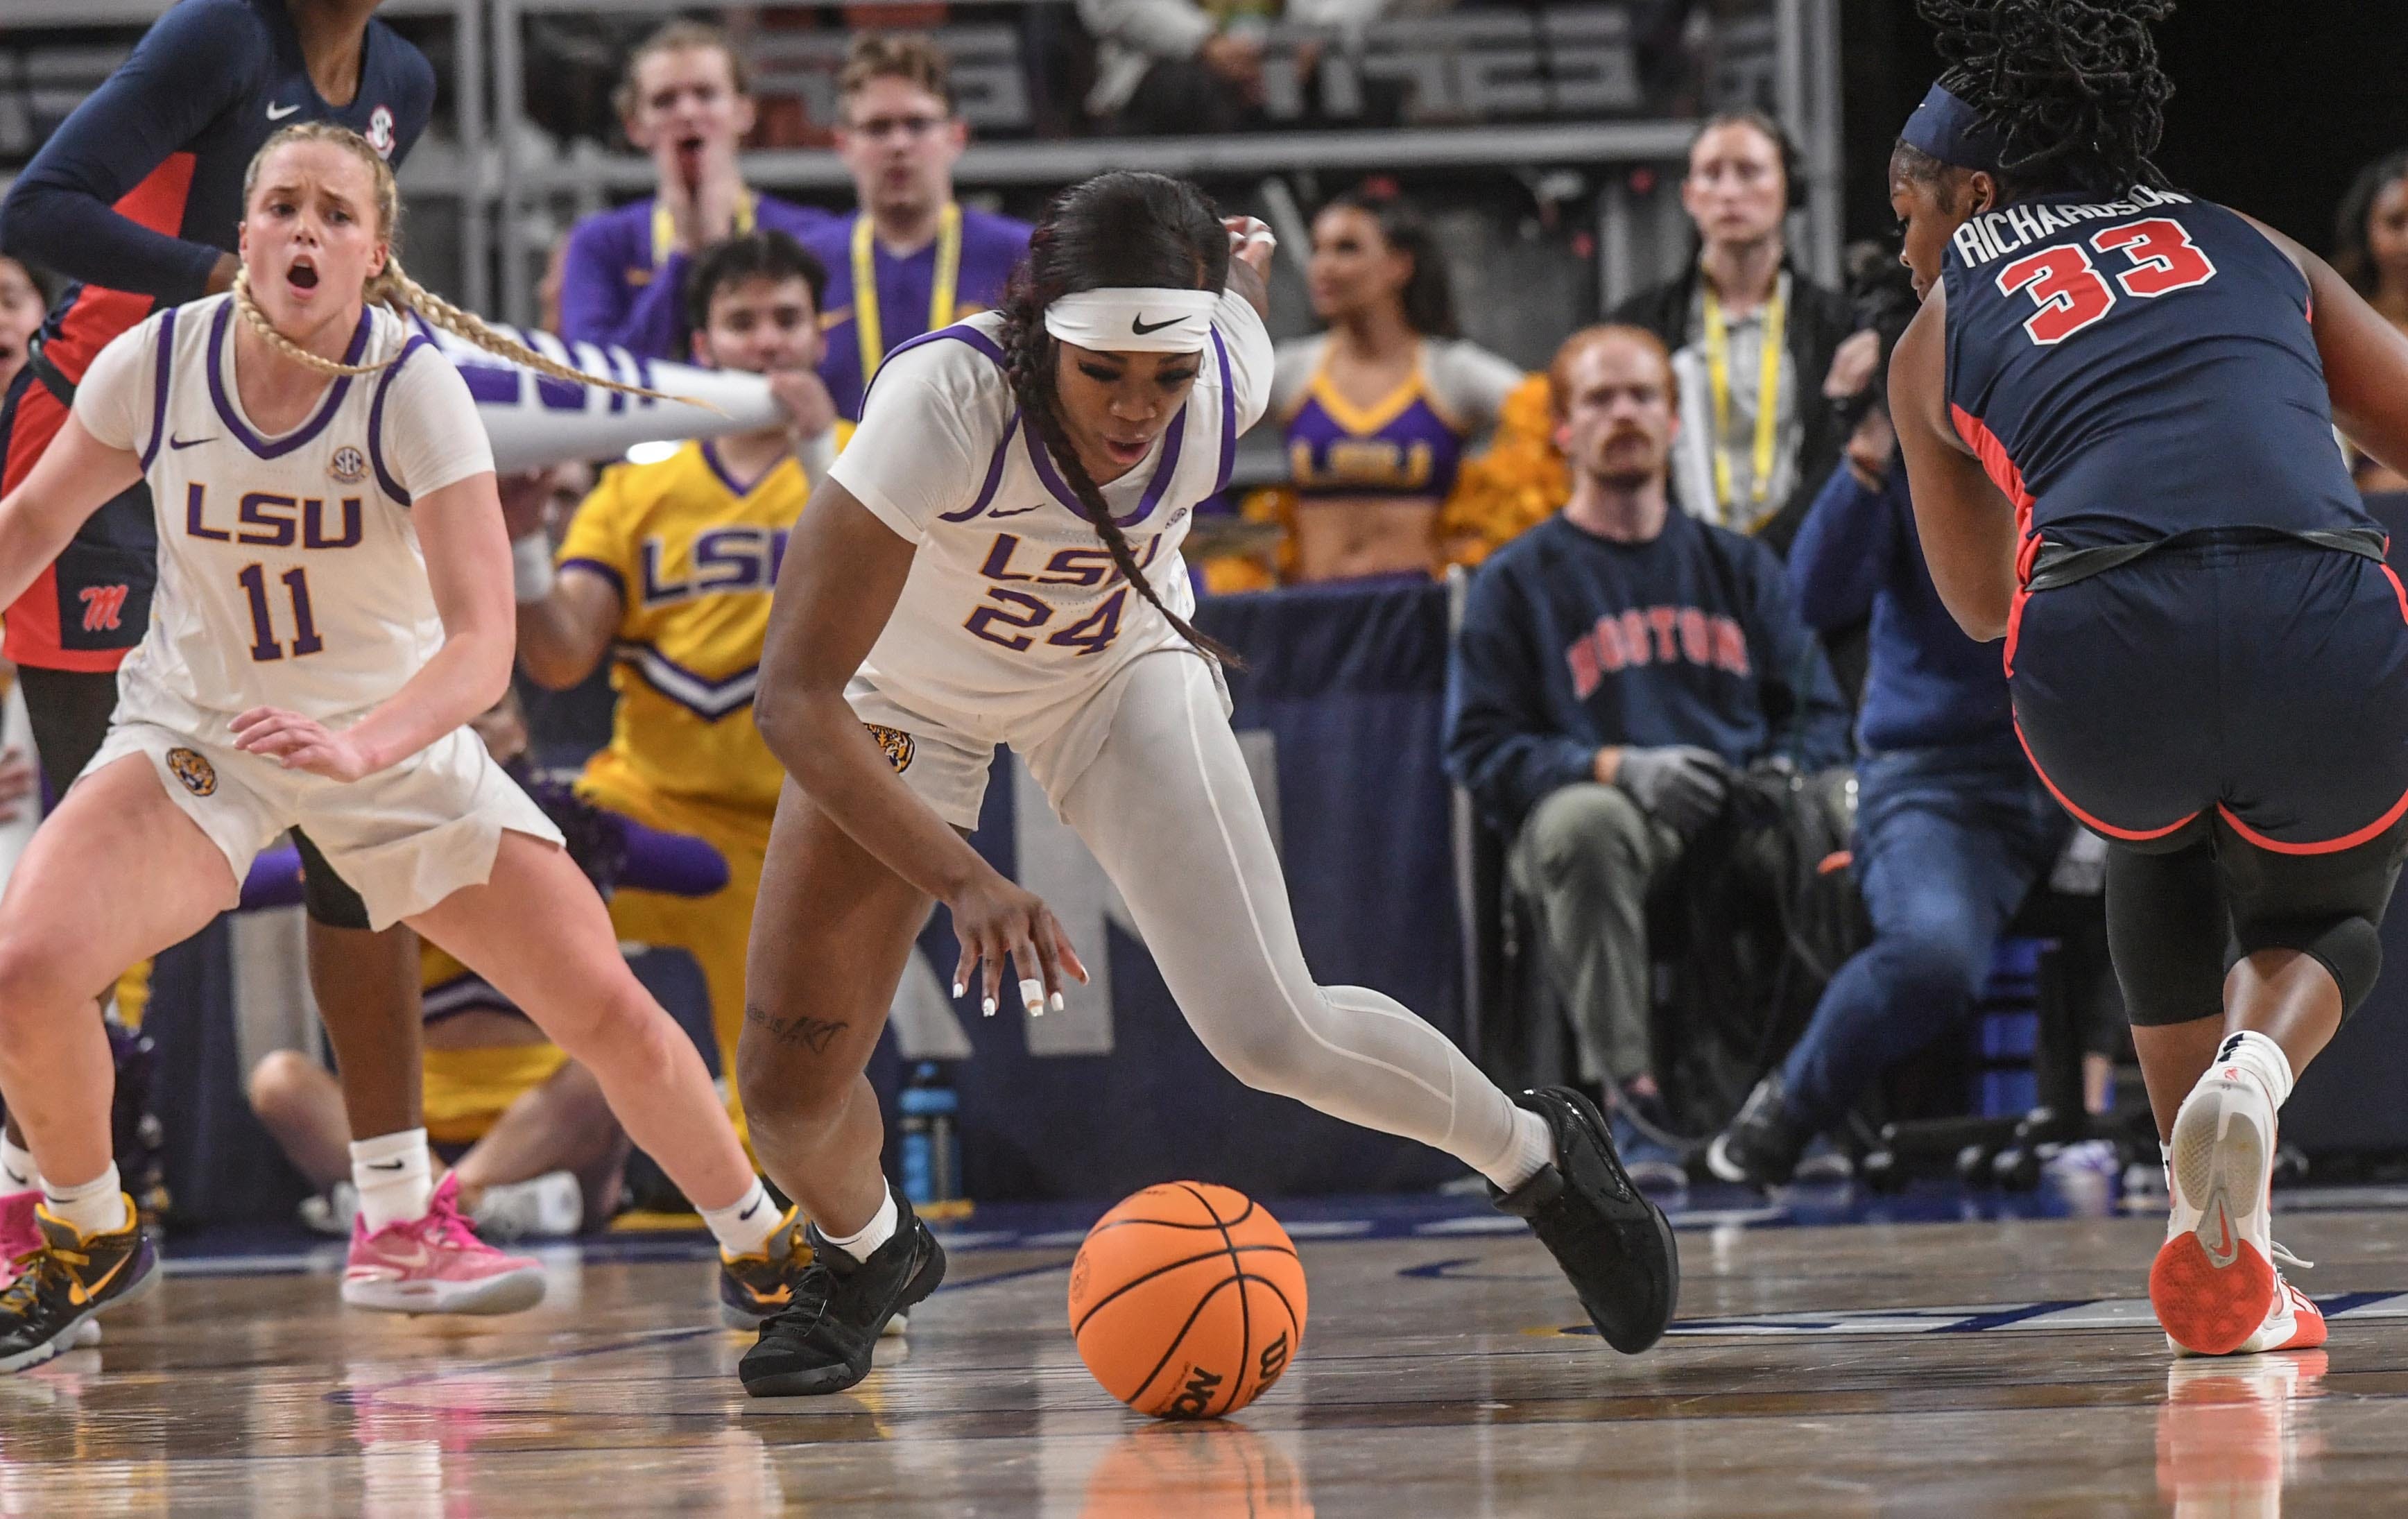 Louisiana State University guard Aneesah Morrow (24) gets a loose ball near Ole Miss forward Kharyssa Richardson (33) during the first quarter of the SEC Women's Basketball Tournament game at the Bon Secours Wellness Arena in Greenville, S.C. Saturday, March 9, 2024.